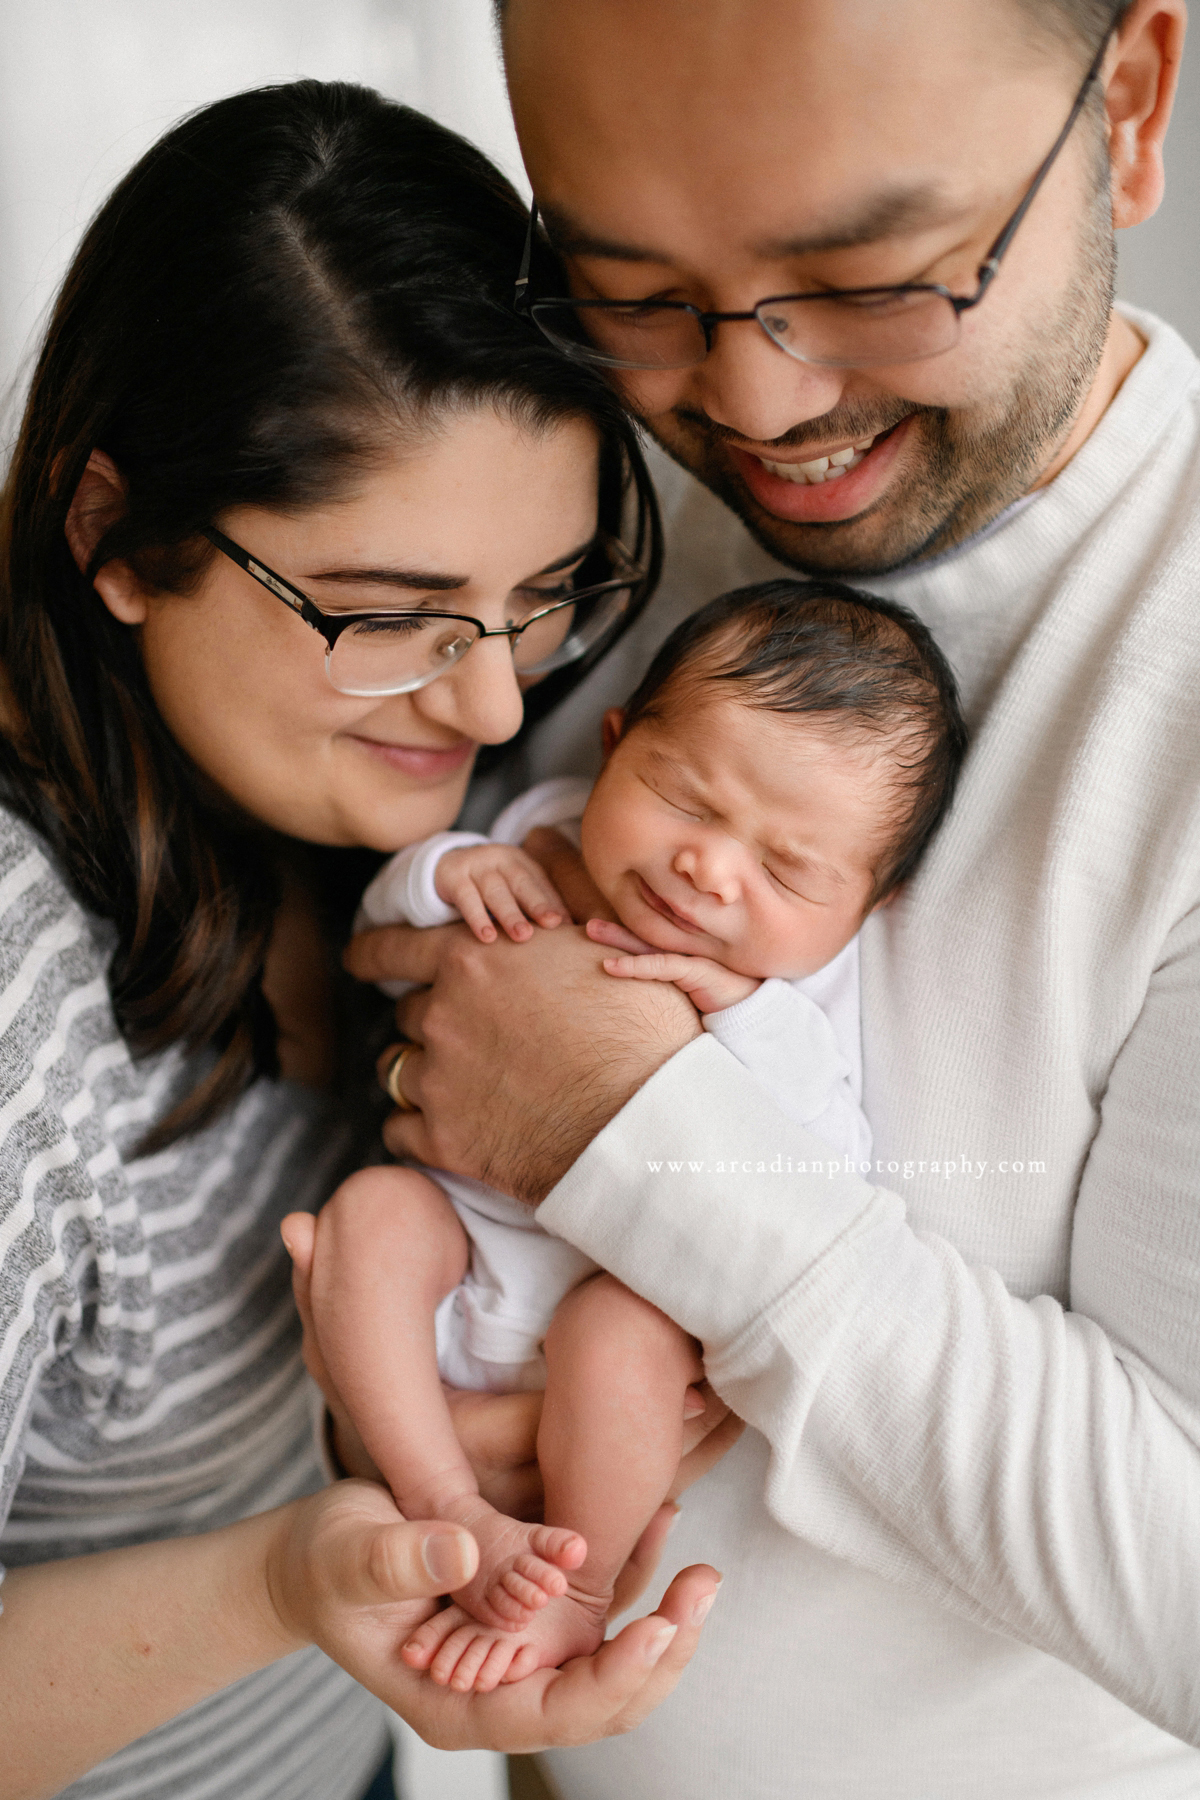 Newborn pose with mom and dad - learn more about booking newborn photos.